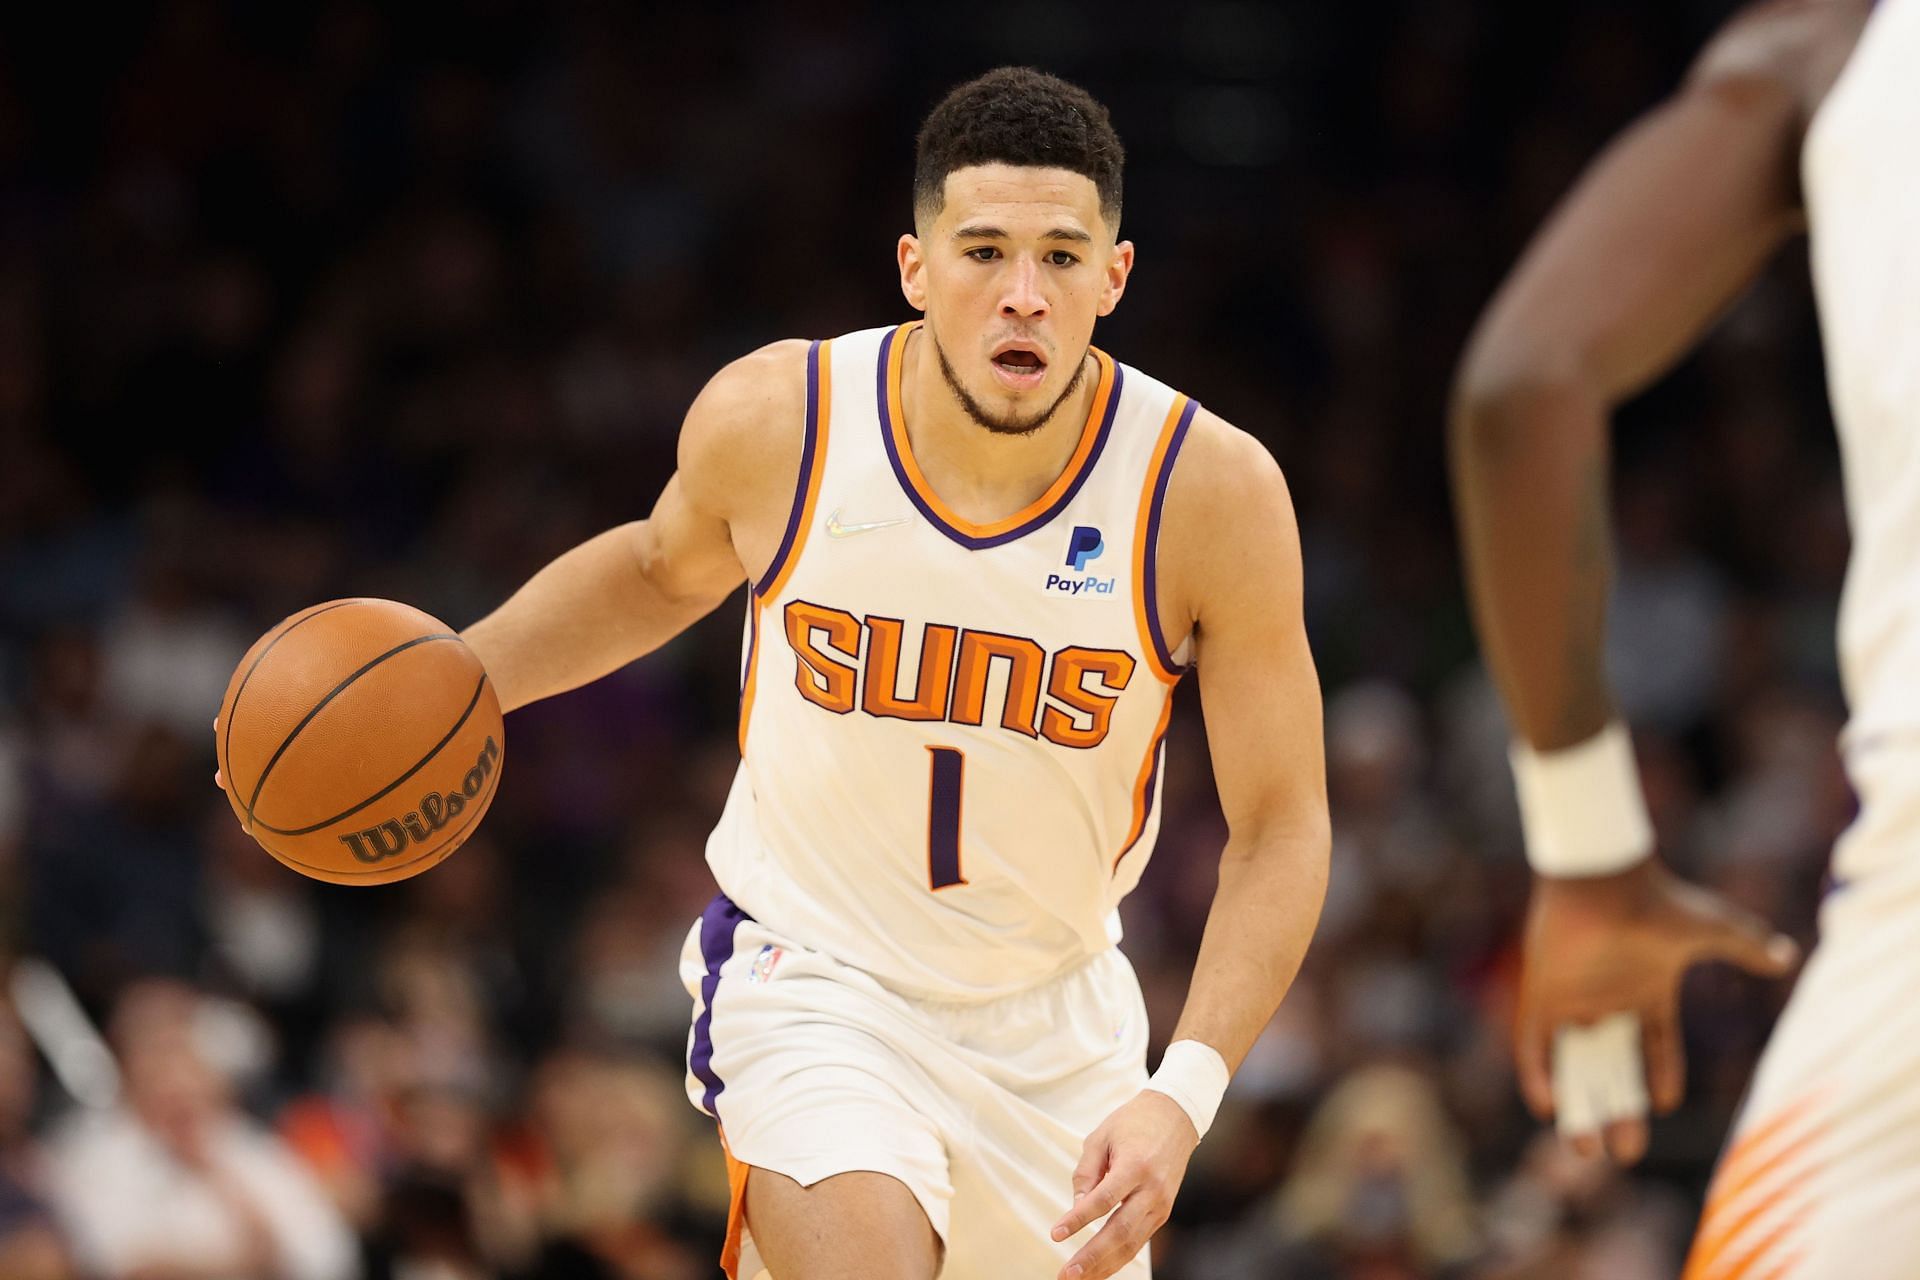 Devin Booker reflects on his time at Kentucky, NBA future - CatsIllustrated